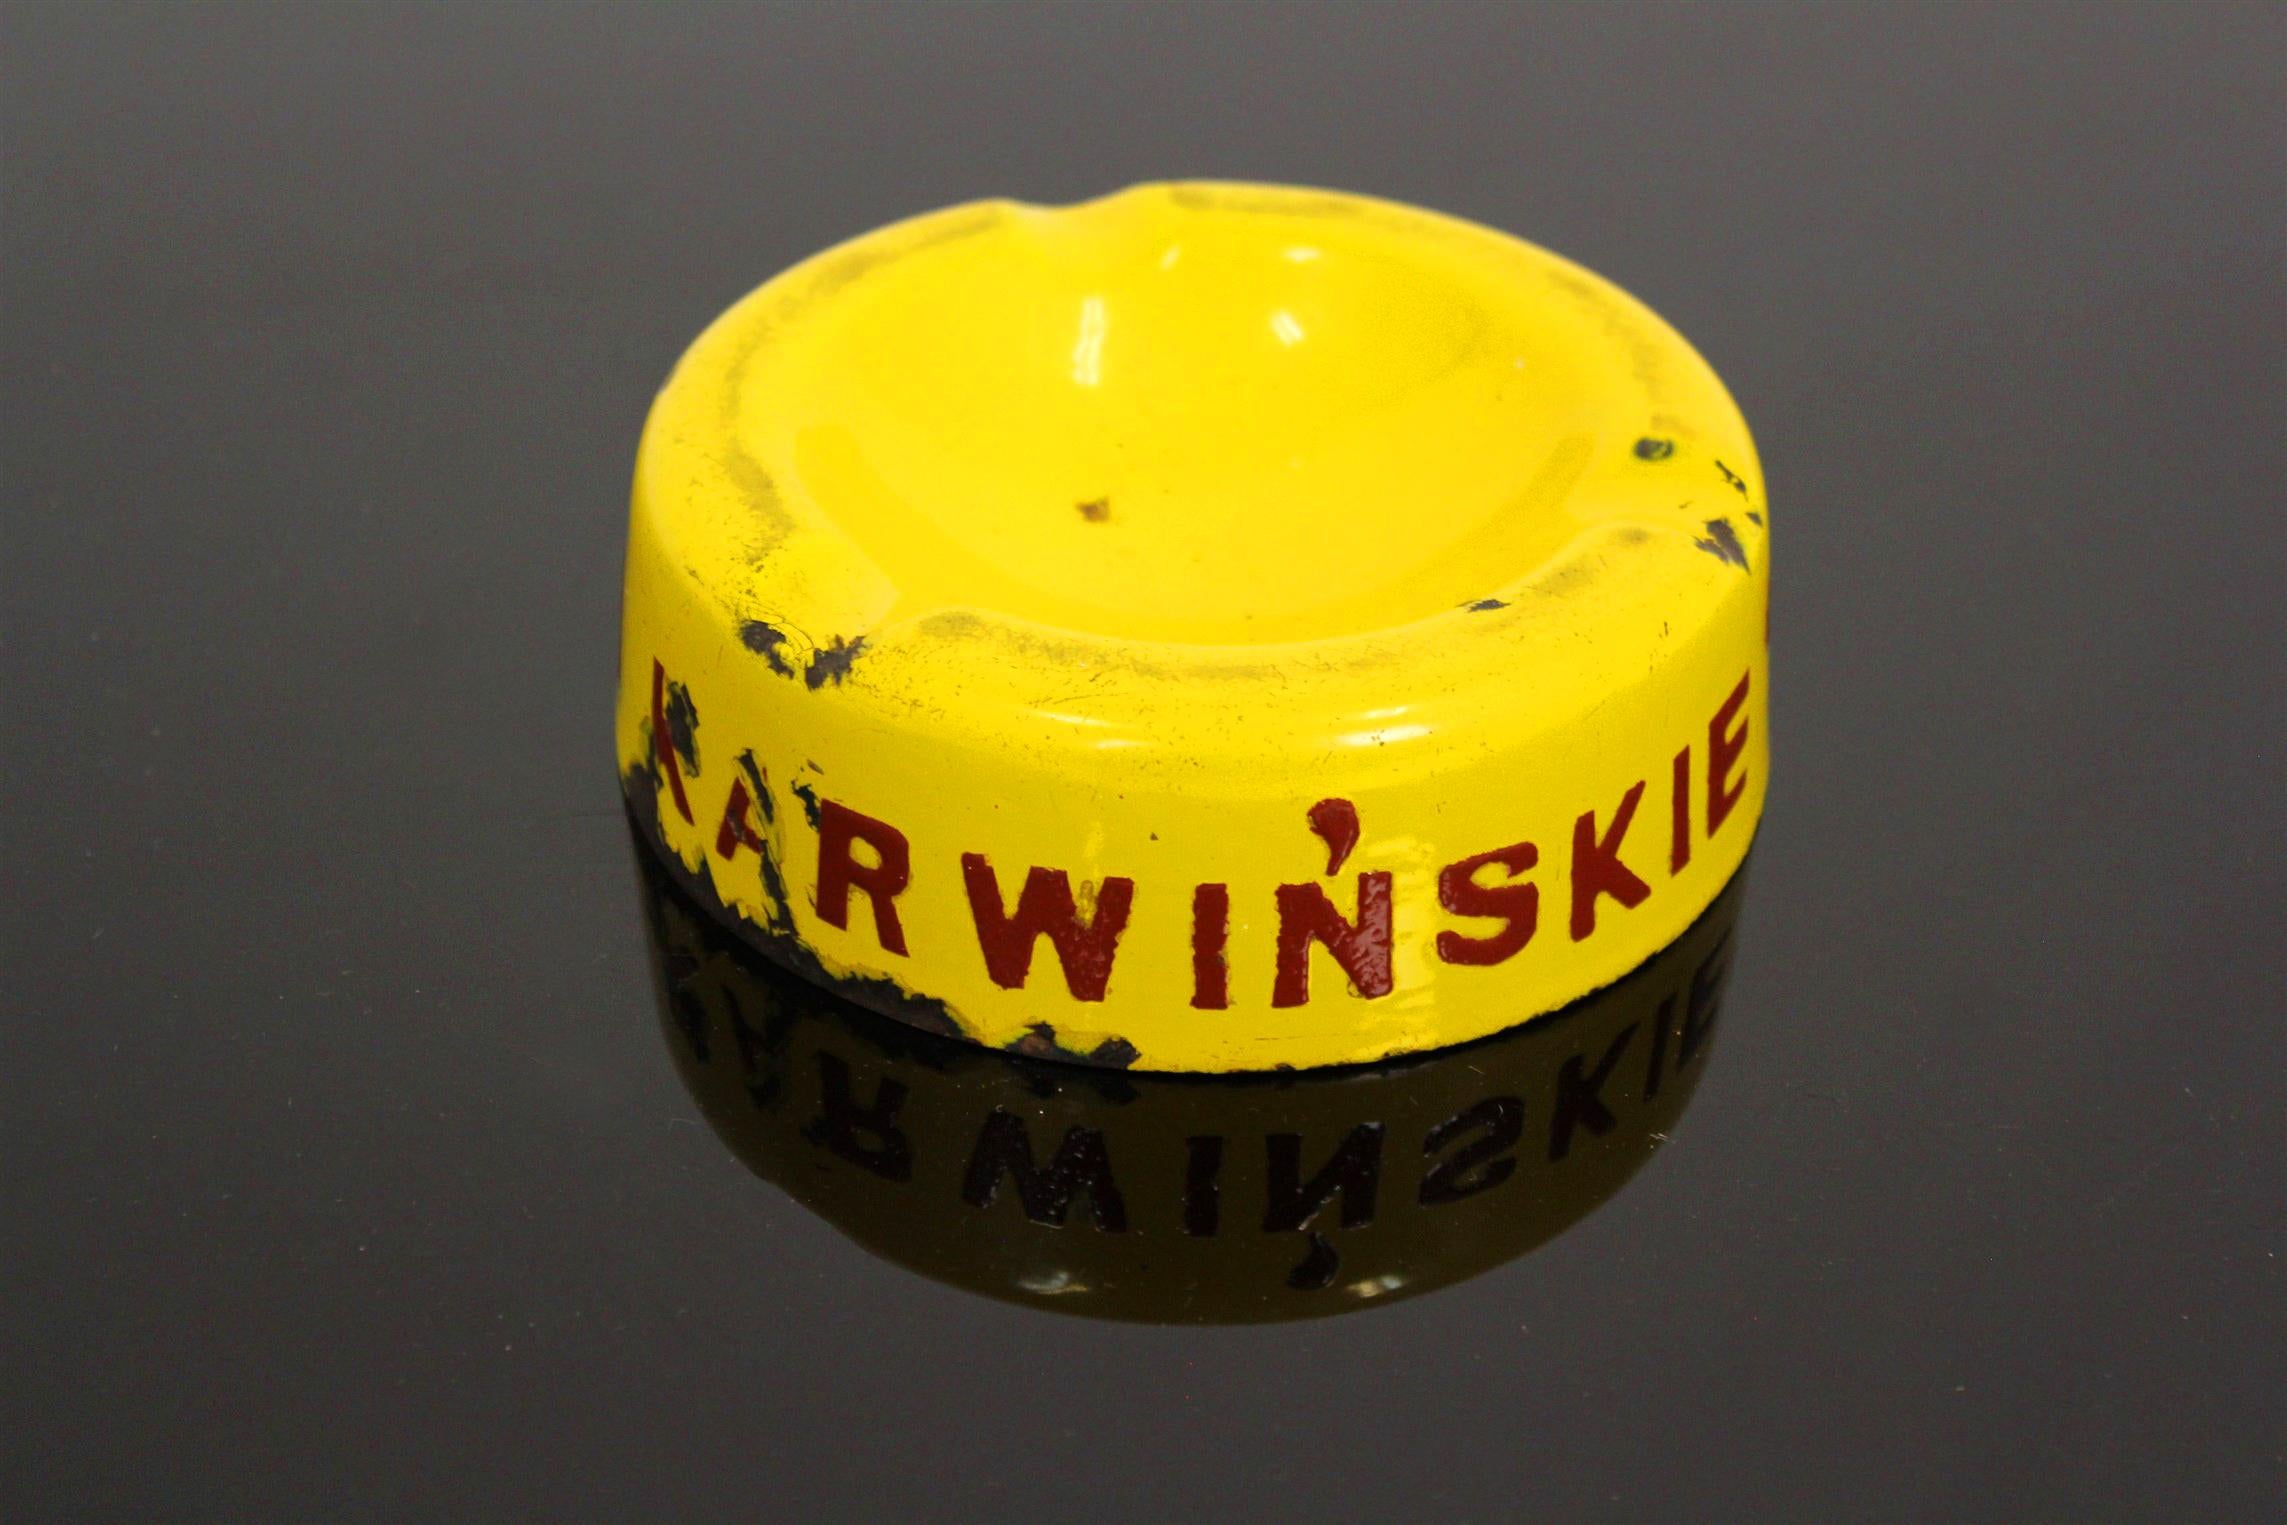 Collectible Karwinskie Brewery Metal Enamel Ashtray, Poland/Czech Republic, 1930 In Good Condition For Sale In Żory, PL